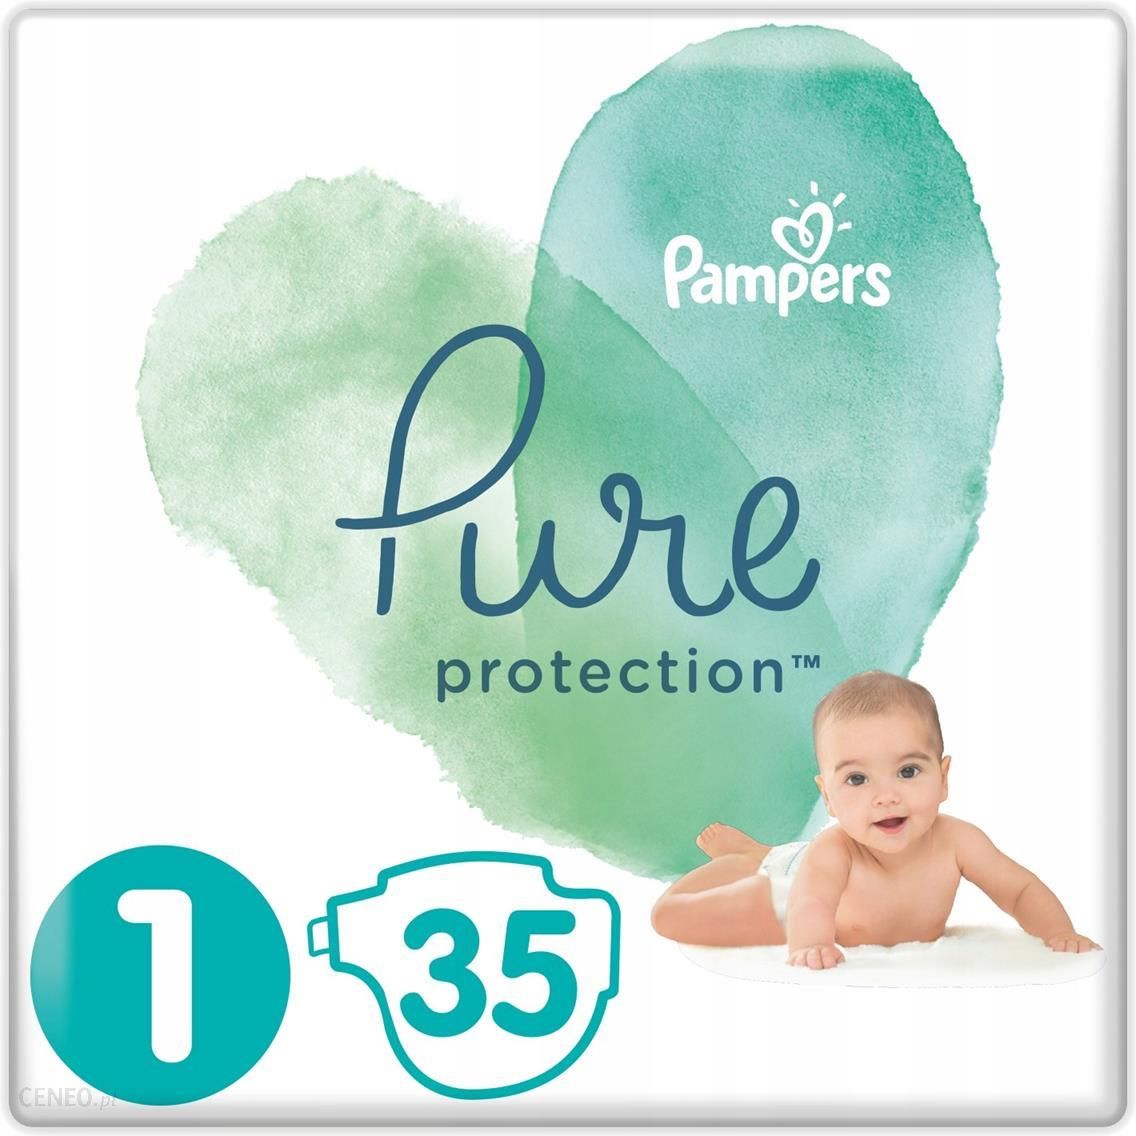 pampers premium protection active fit